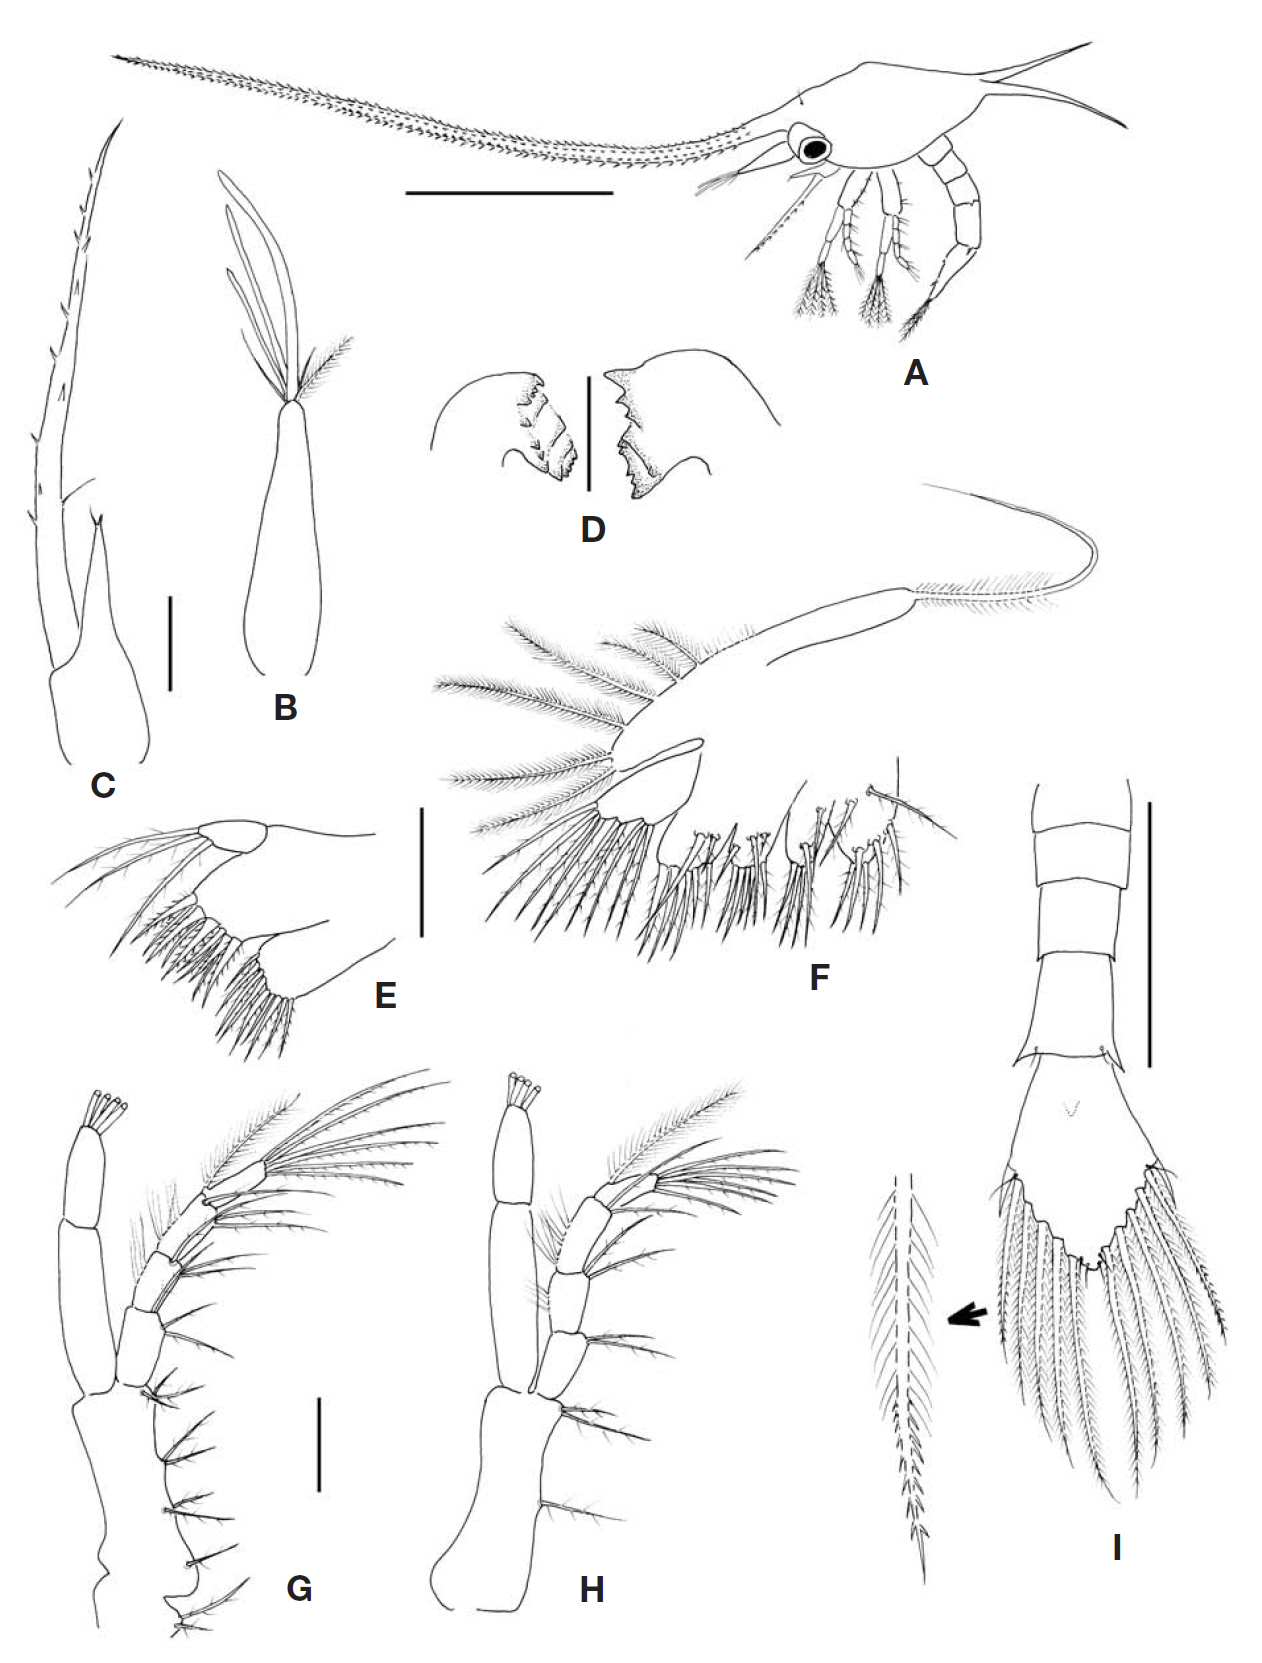 Pisidia serratifrons first zoeal stage. A Lateral view of the entire animal; B Antennule; C Antenna; D Mandibles; E Maxillule; F Maxilla; G First maxilliped; H Second maxilliped; I Dorsal view of the abdomen and telson. Scale bars: A=1 mm B-H=0.1 mm I=0.5 mm.